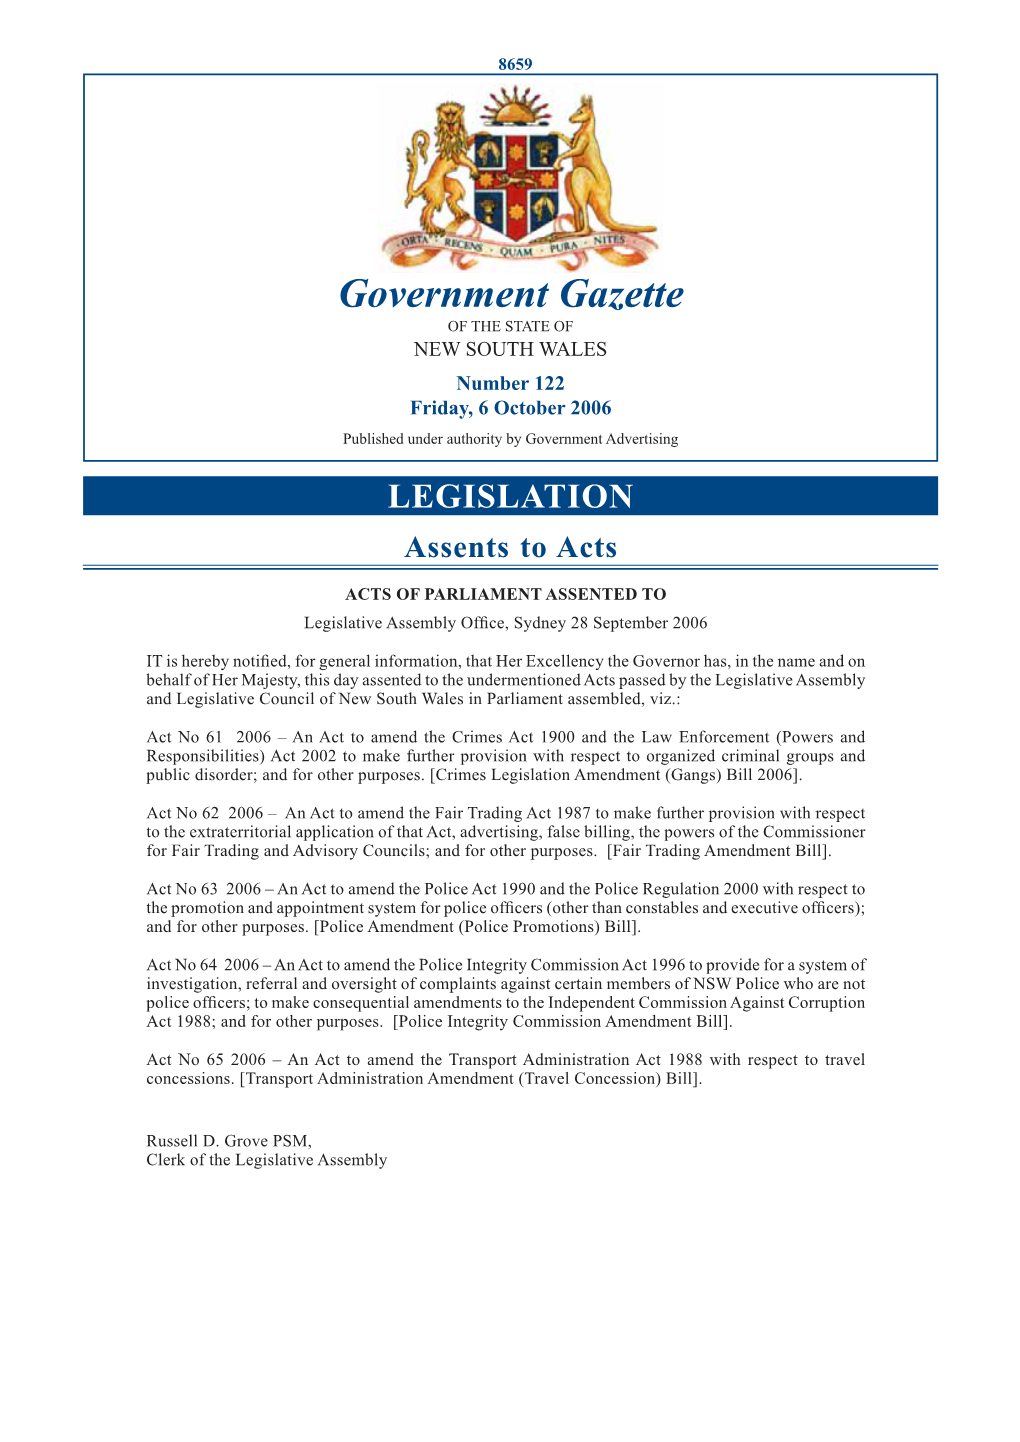 Government Gazette of the STATE of NEW SOUTH WALES Number 122 Friday, 6 October 2006 Published Under Authority by Government Advertising